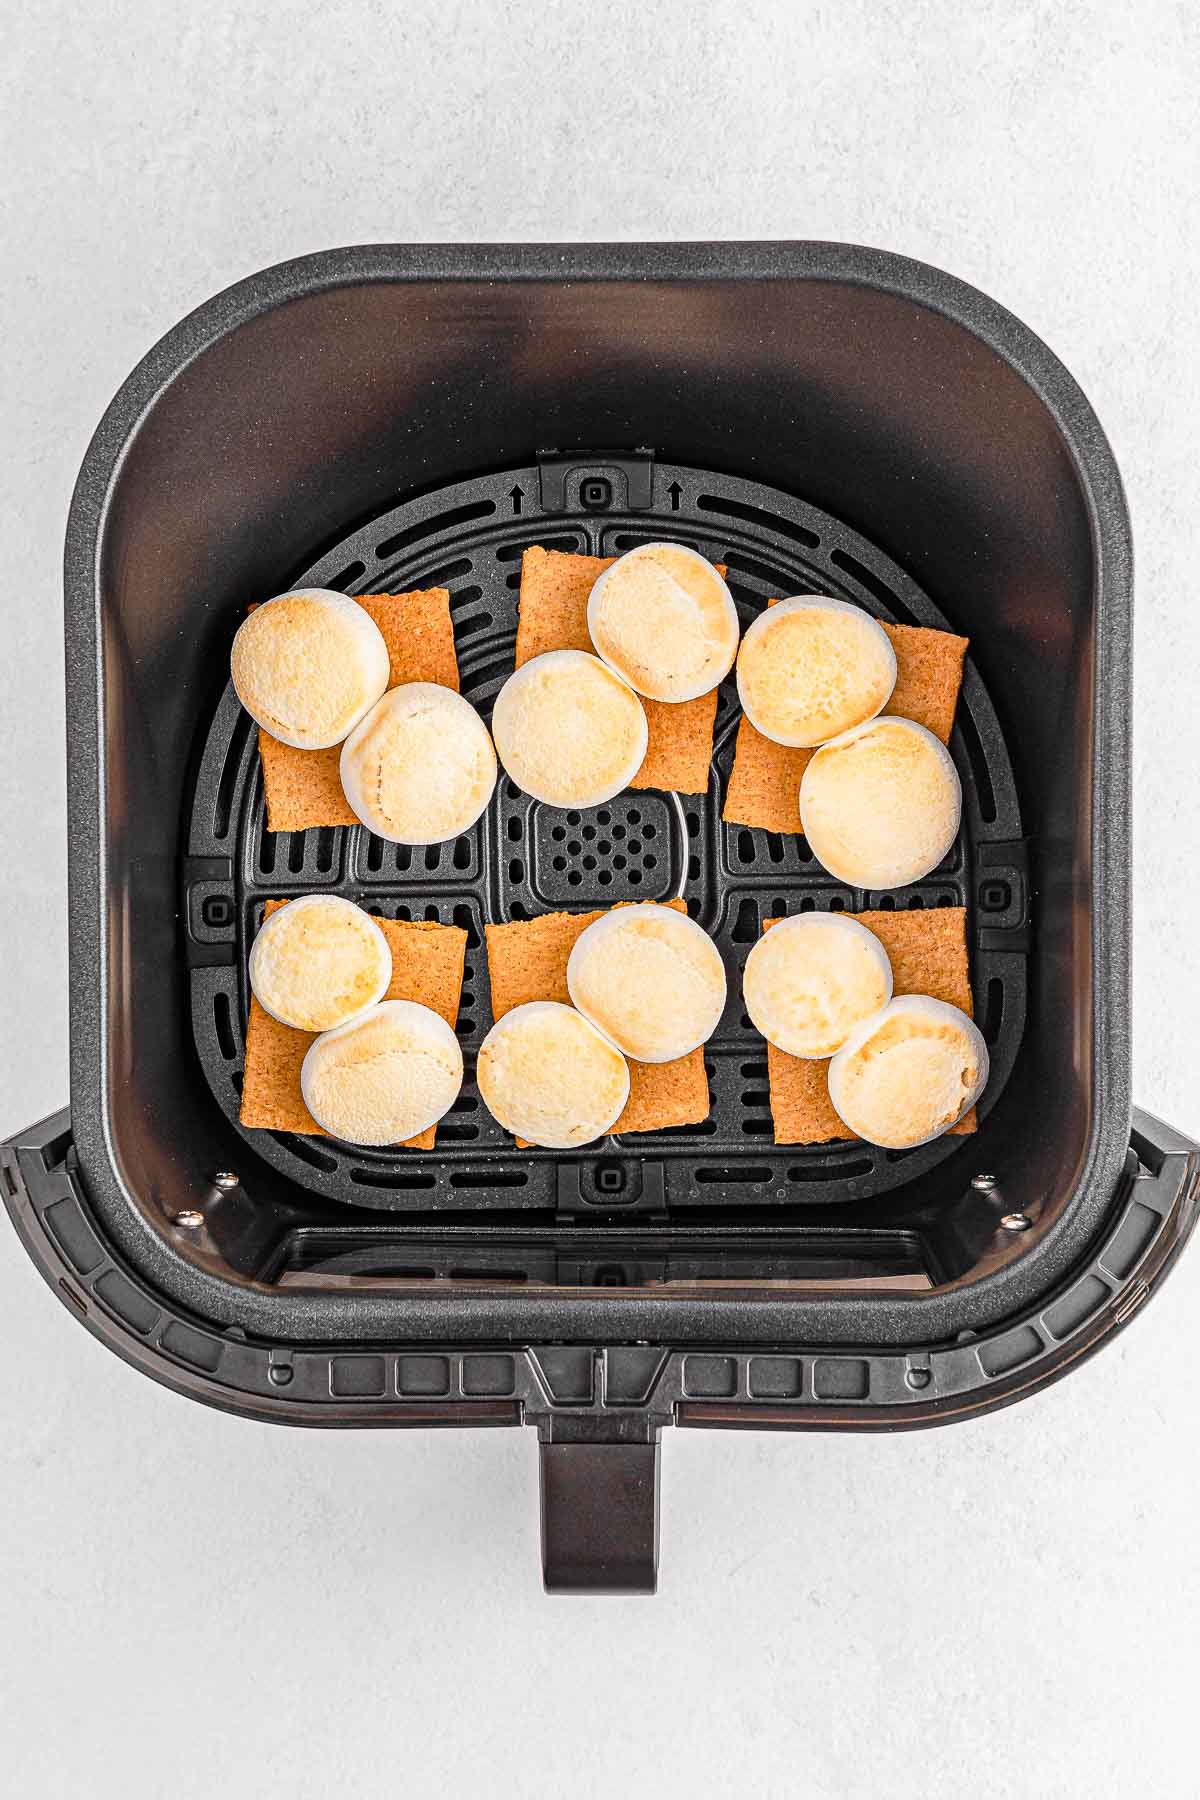 Six graham crackers with cooked marshmallows in air fryer.